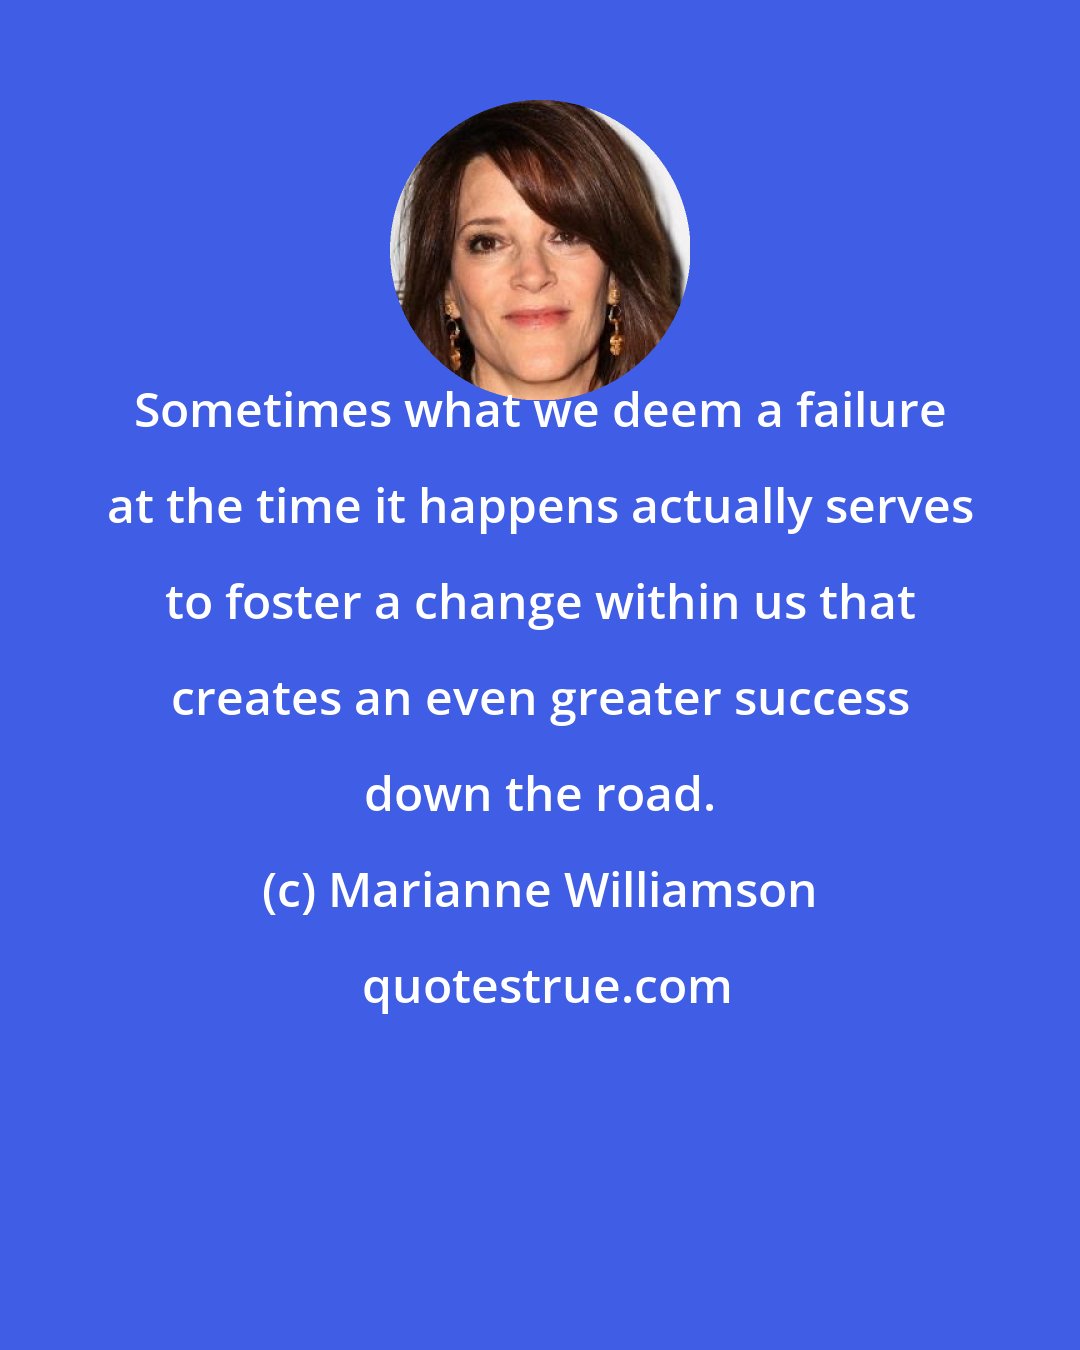 Marianne Williamson: Sometimes what we deem a failure at the time it happens actually serves to foster a change within us that creates an even greater success down the road.